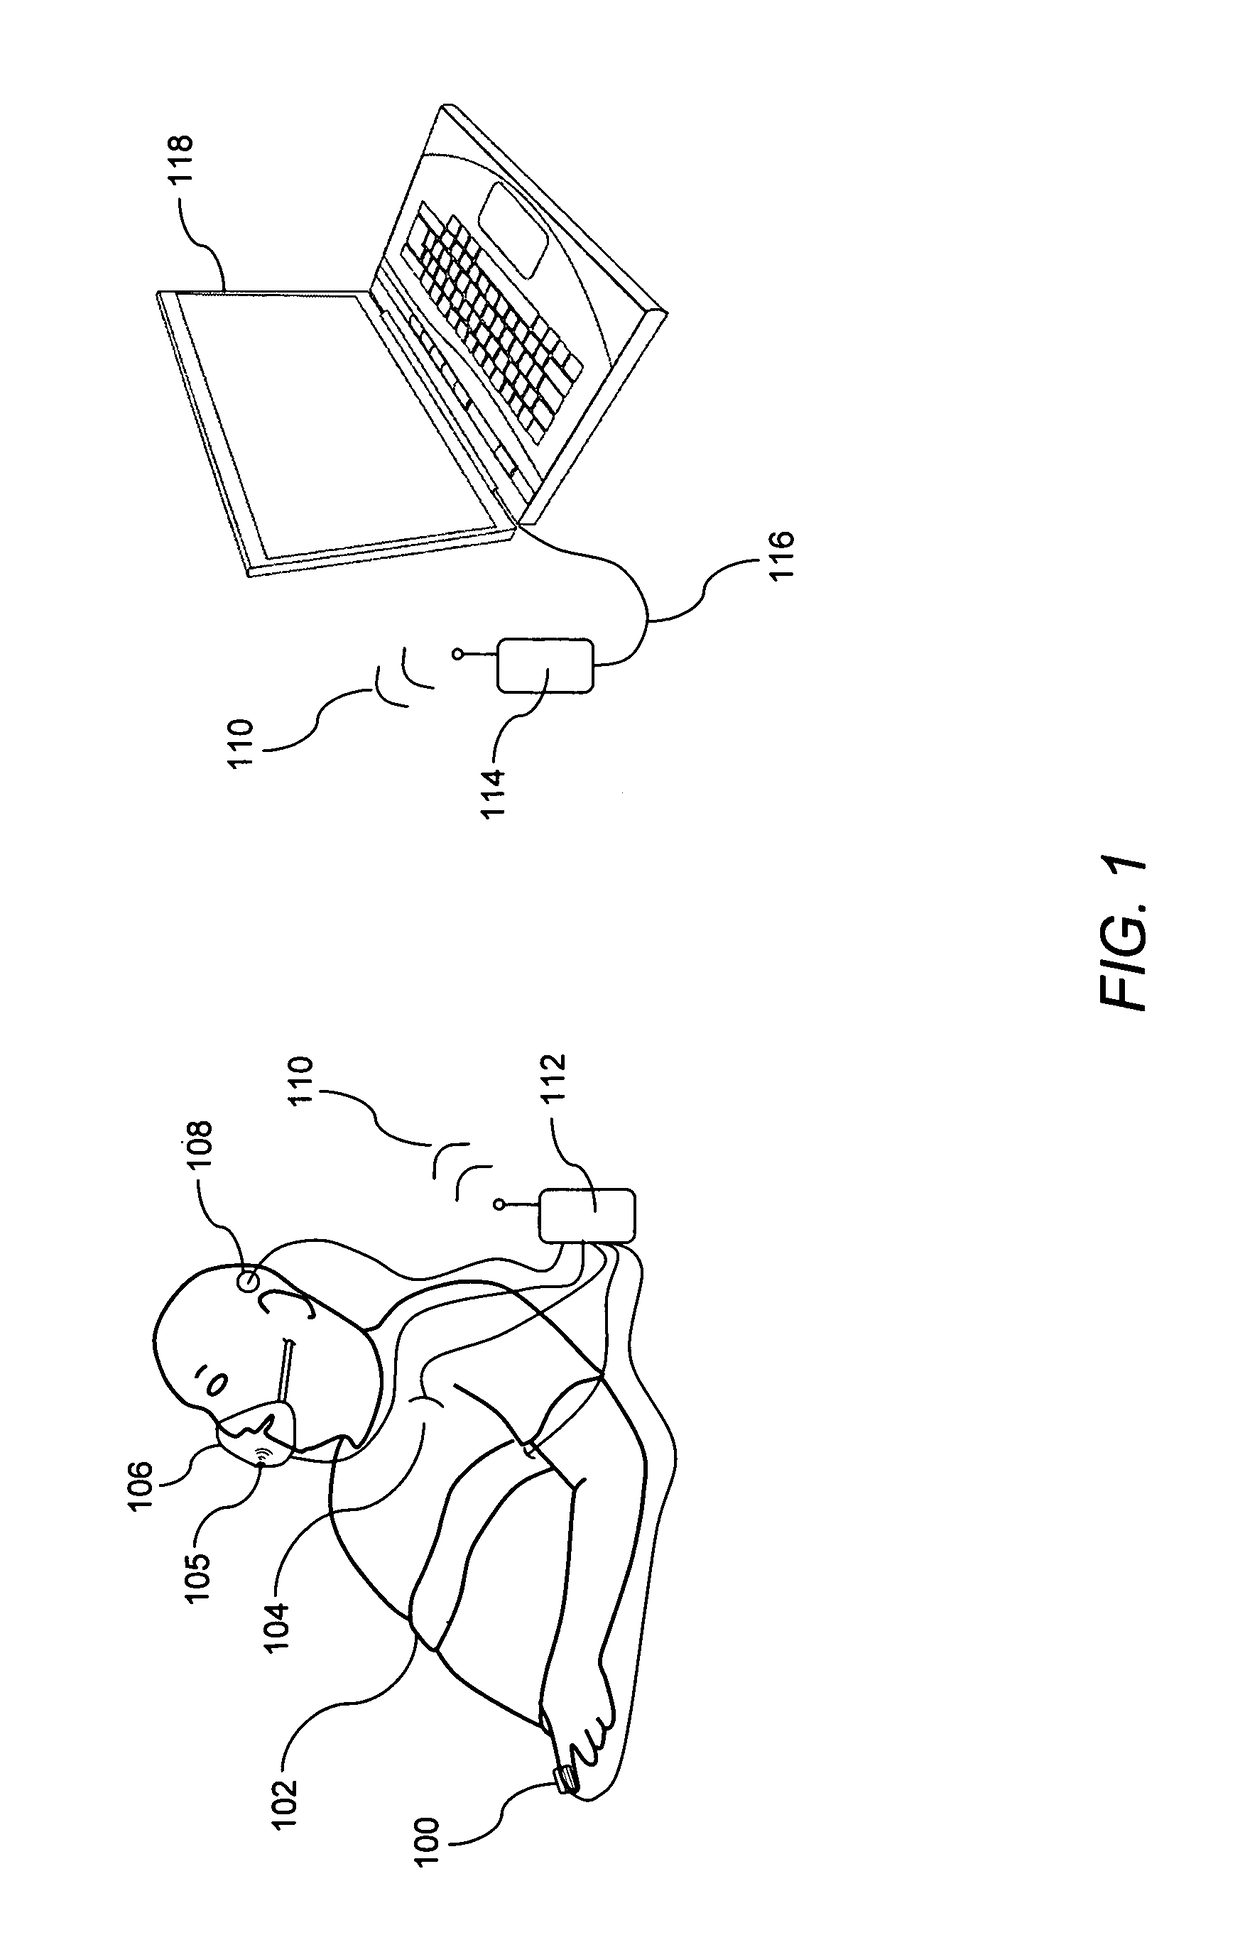 Method and device for sleep analysis and therapy